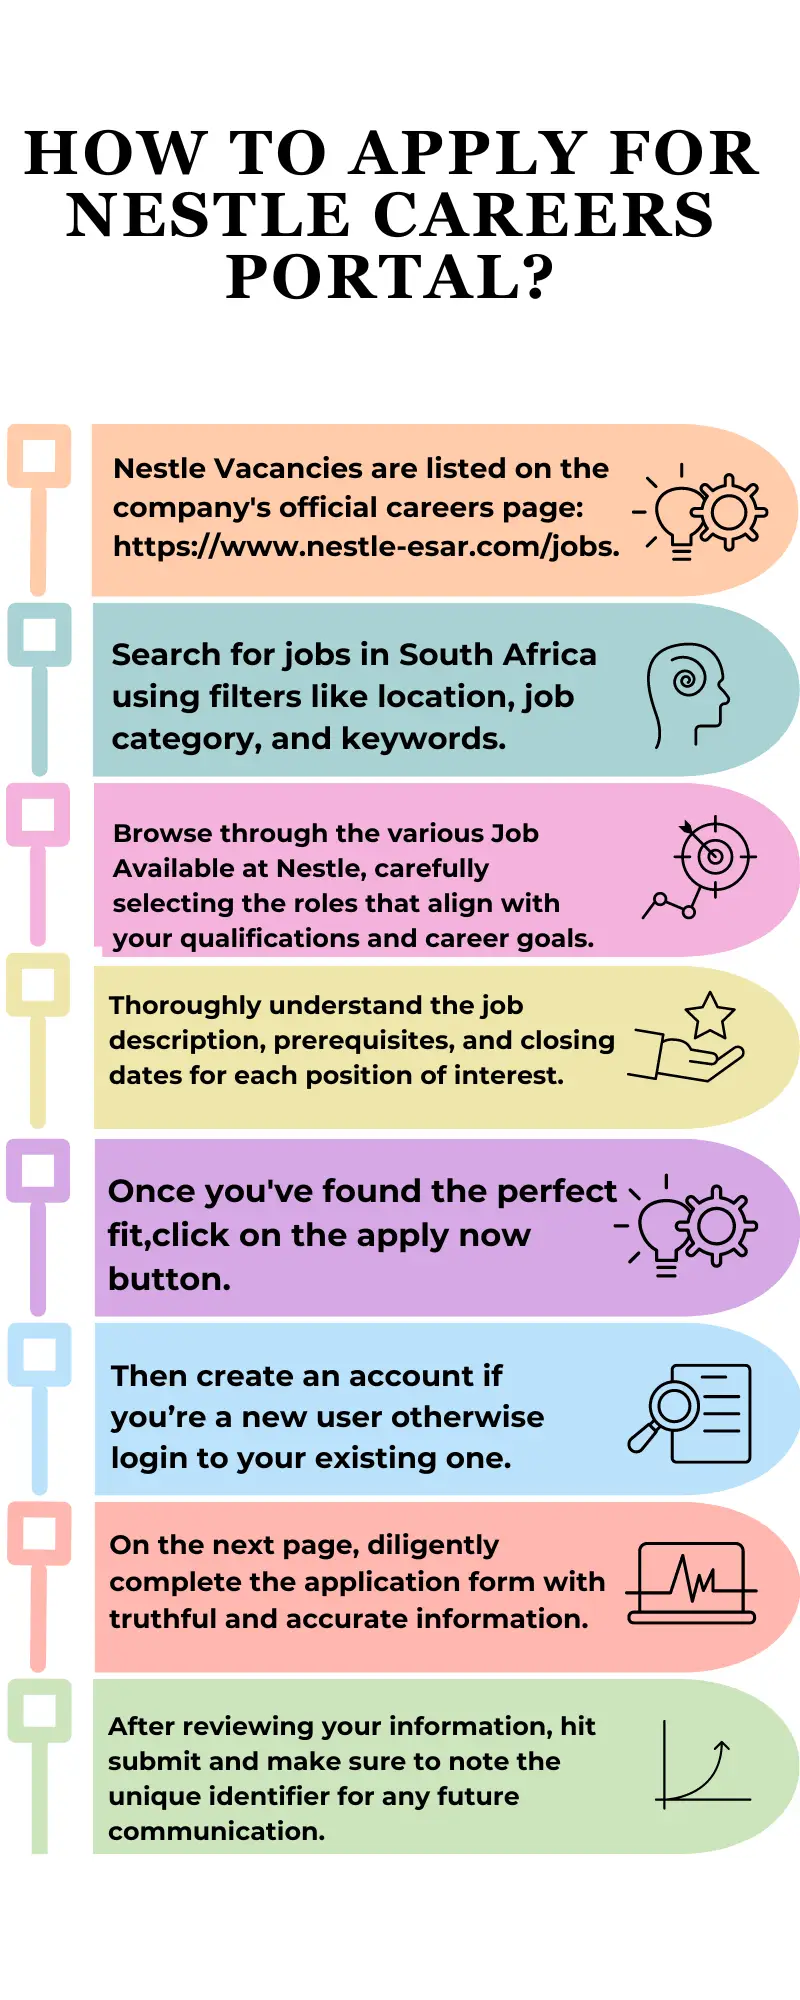 How To Apply for Nestle Careers Portal?